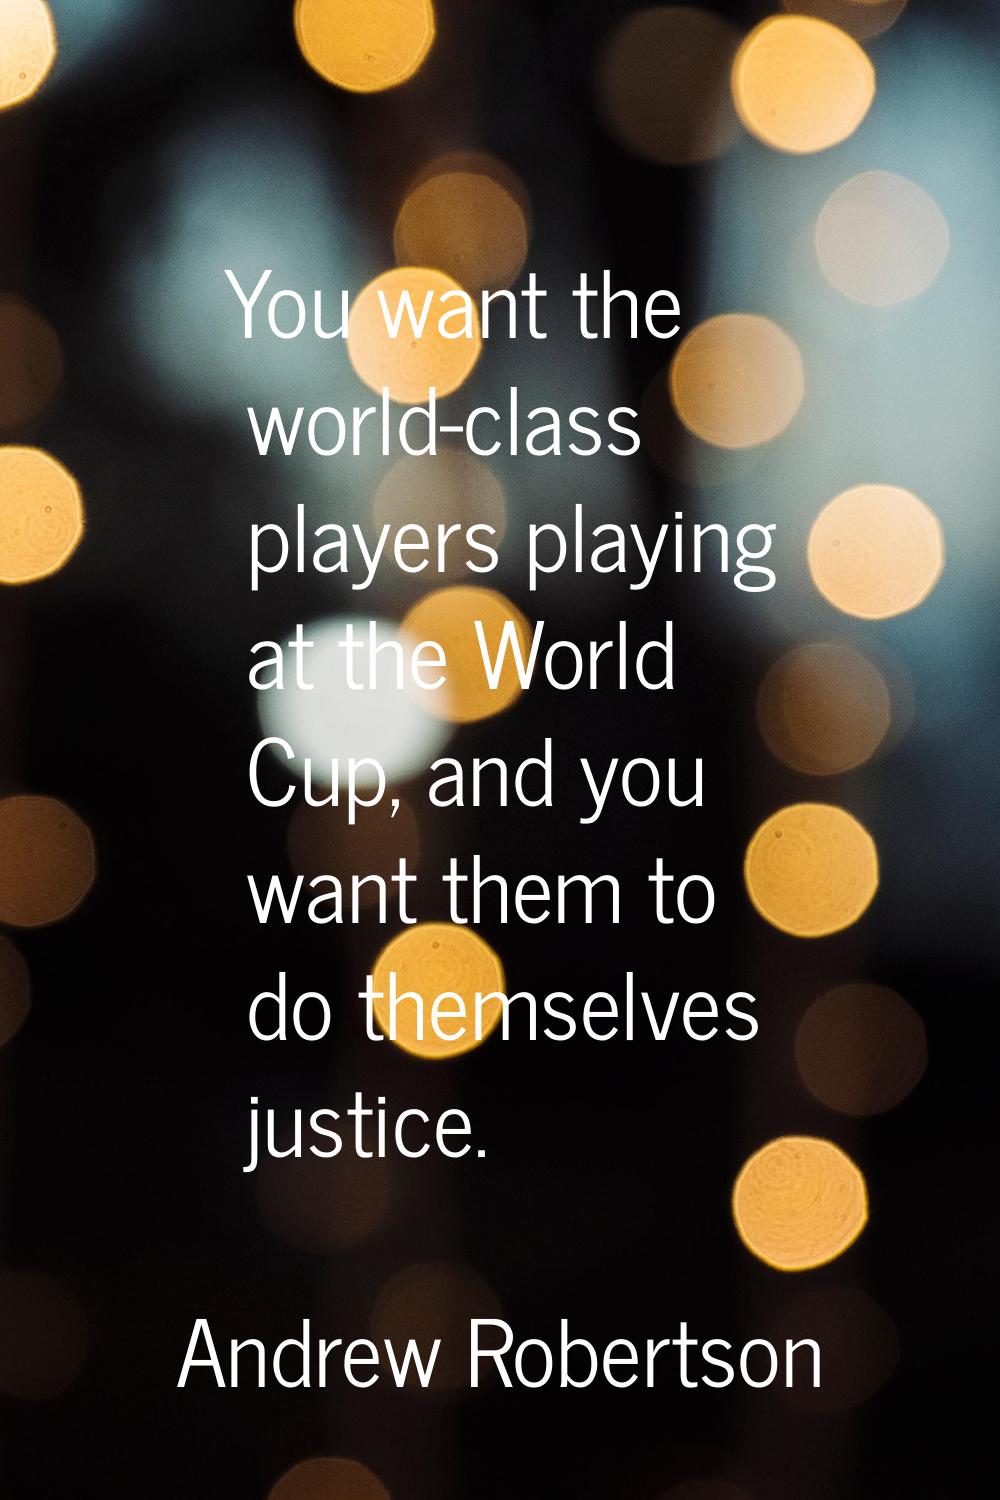 You want the world-class players playing at the World Cup, and you want them to do themselves justi